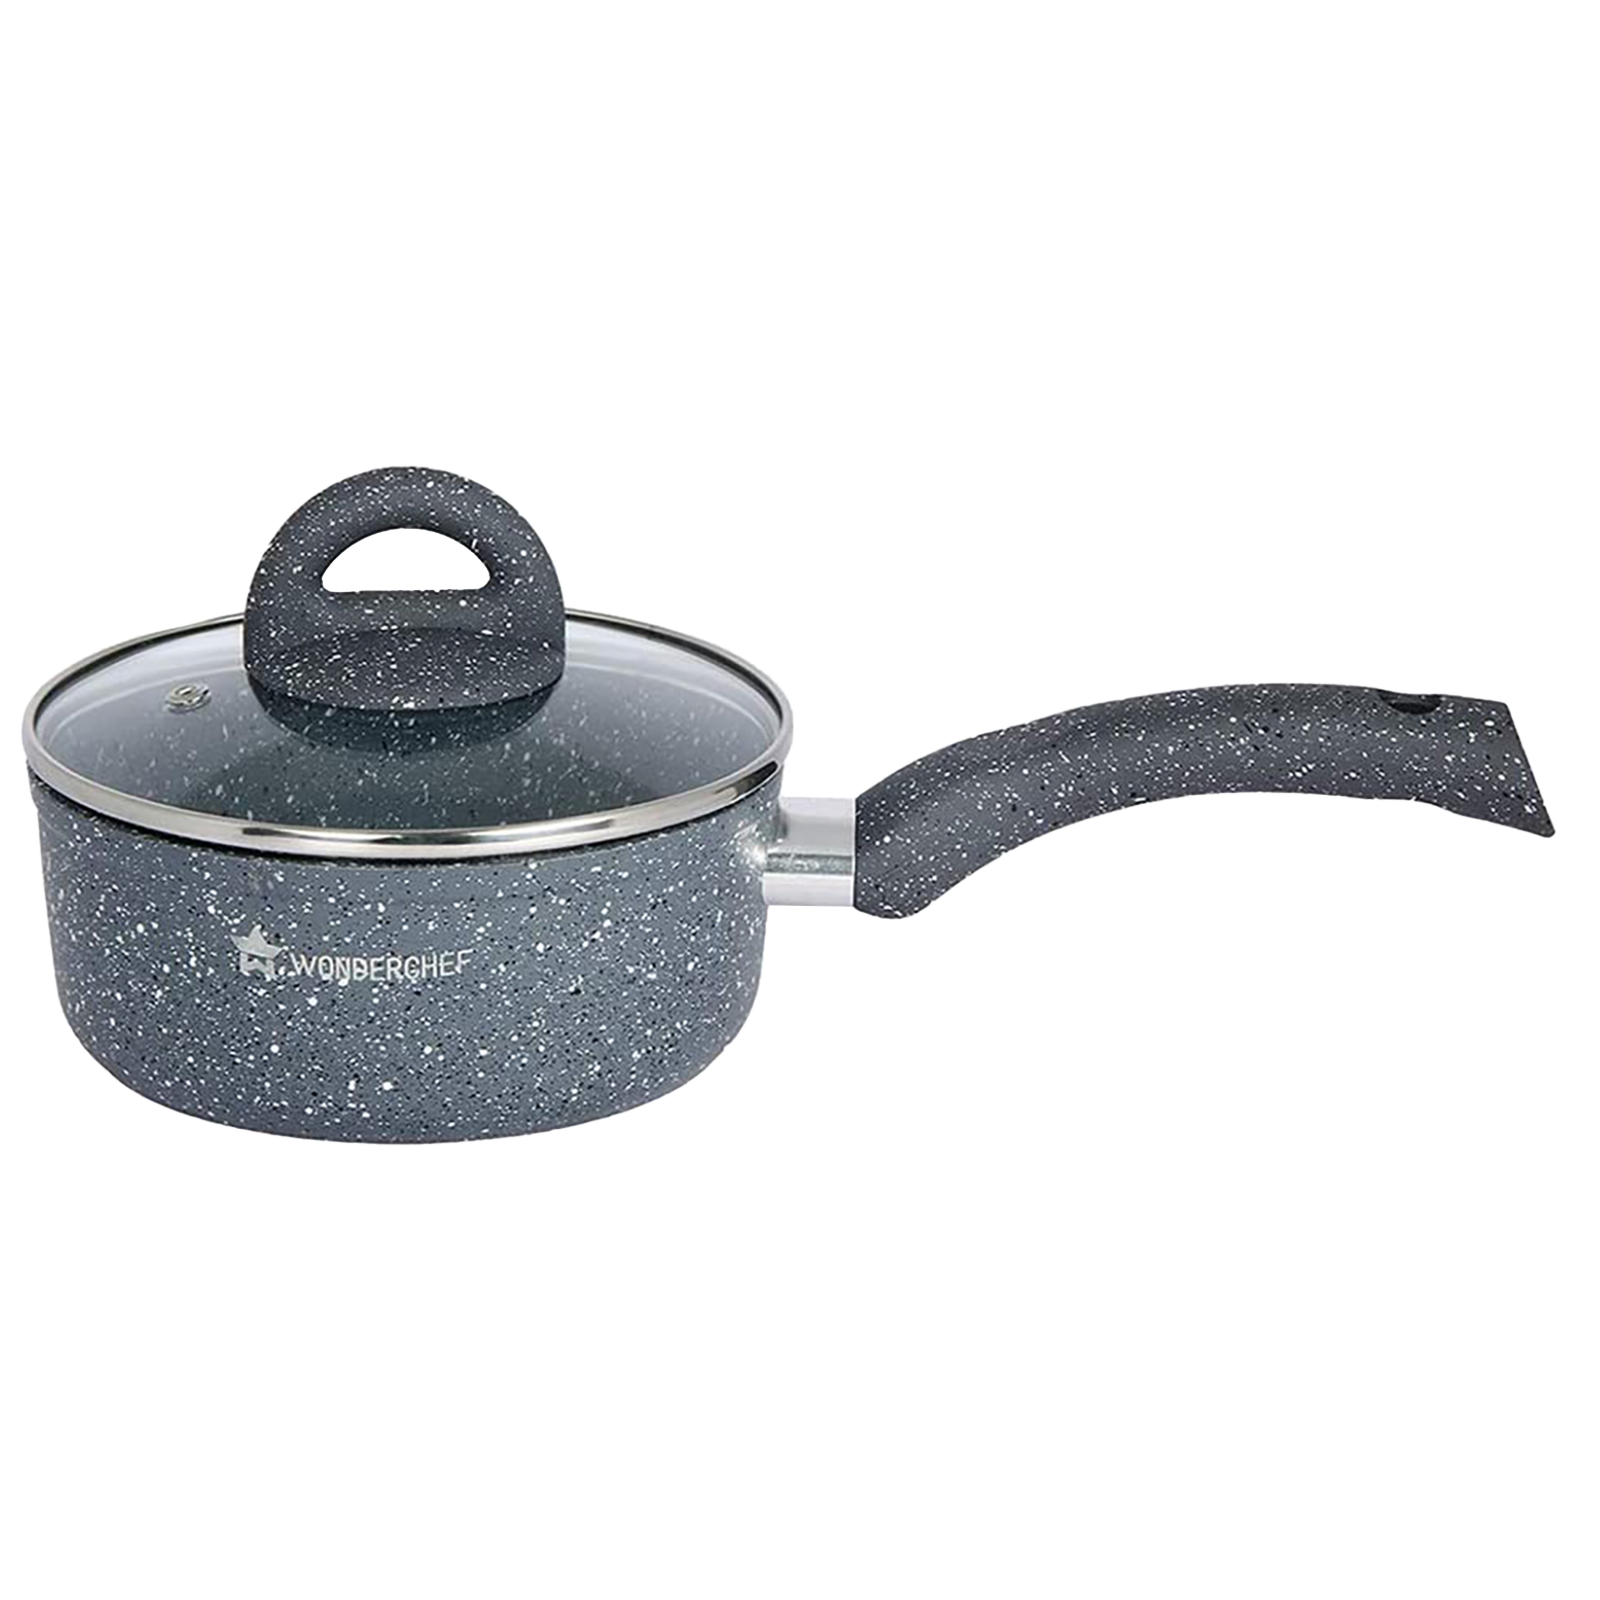 Wonderchef Granite Sauce Pan For Induction Plate, Stoves & Cooktops (Non-Stick Coating, 63152061, Grey)_1